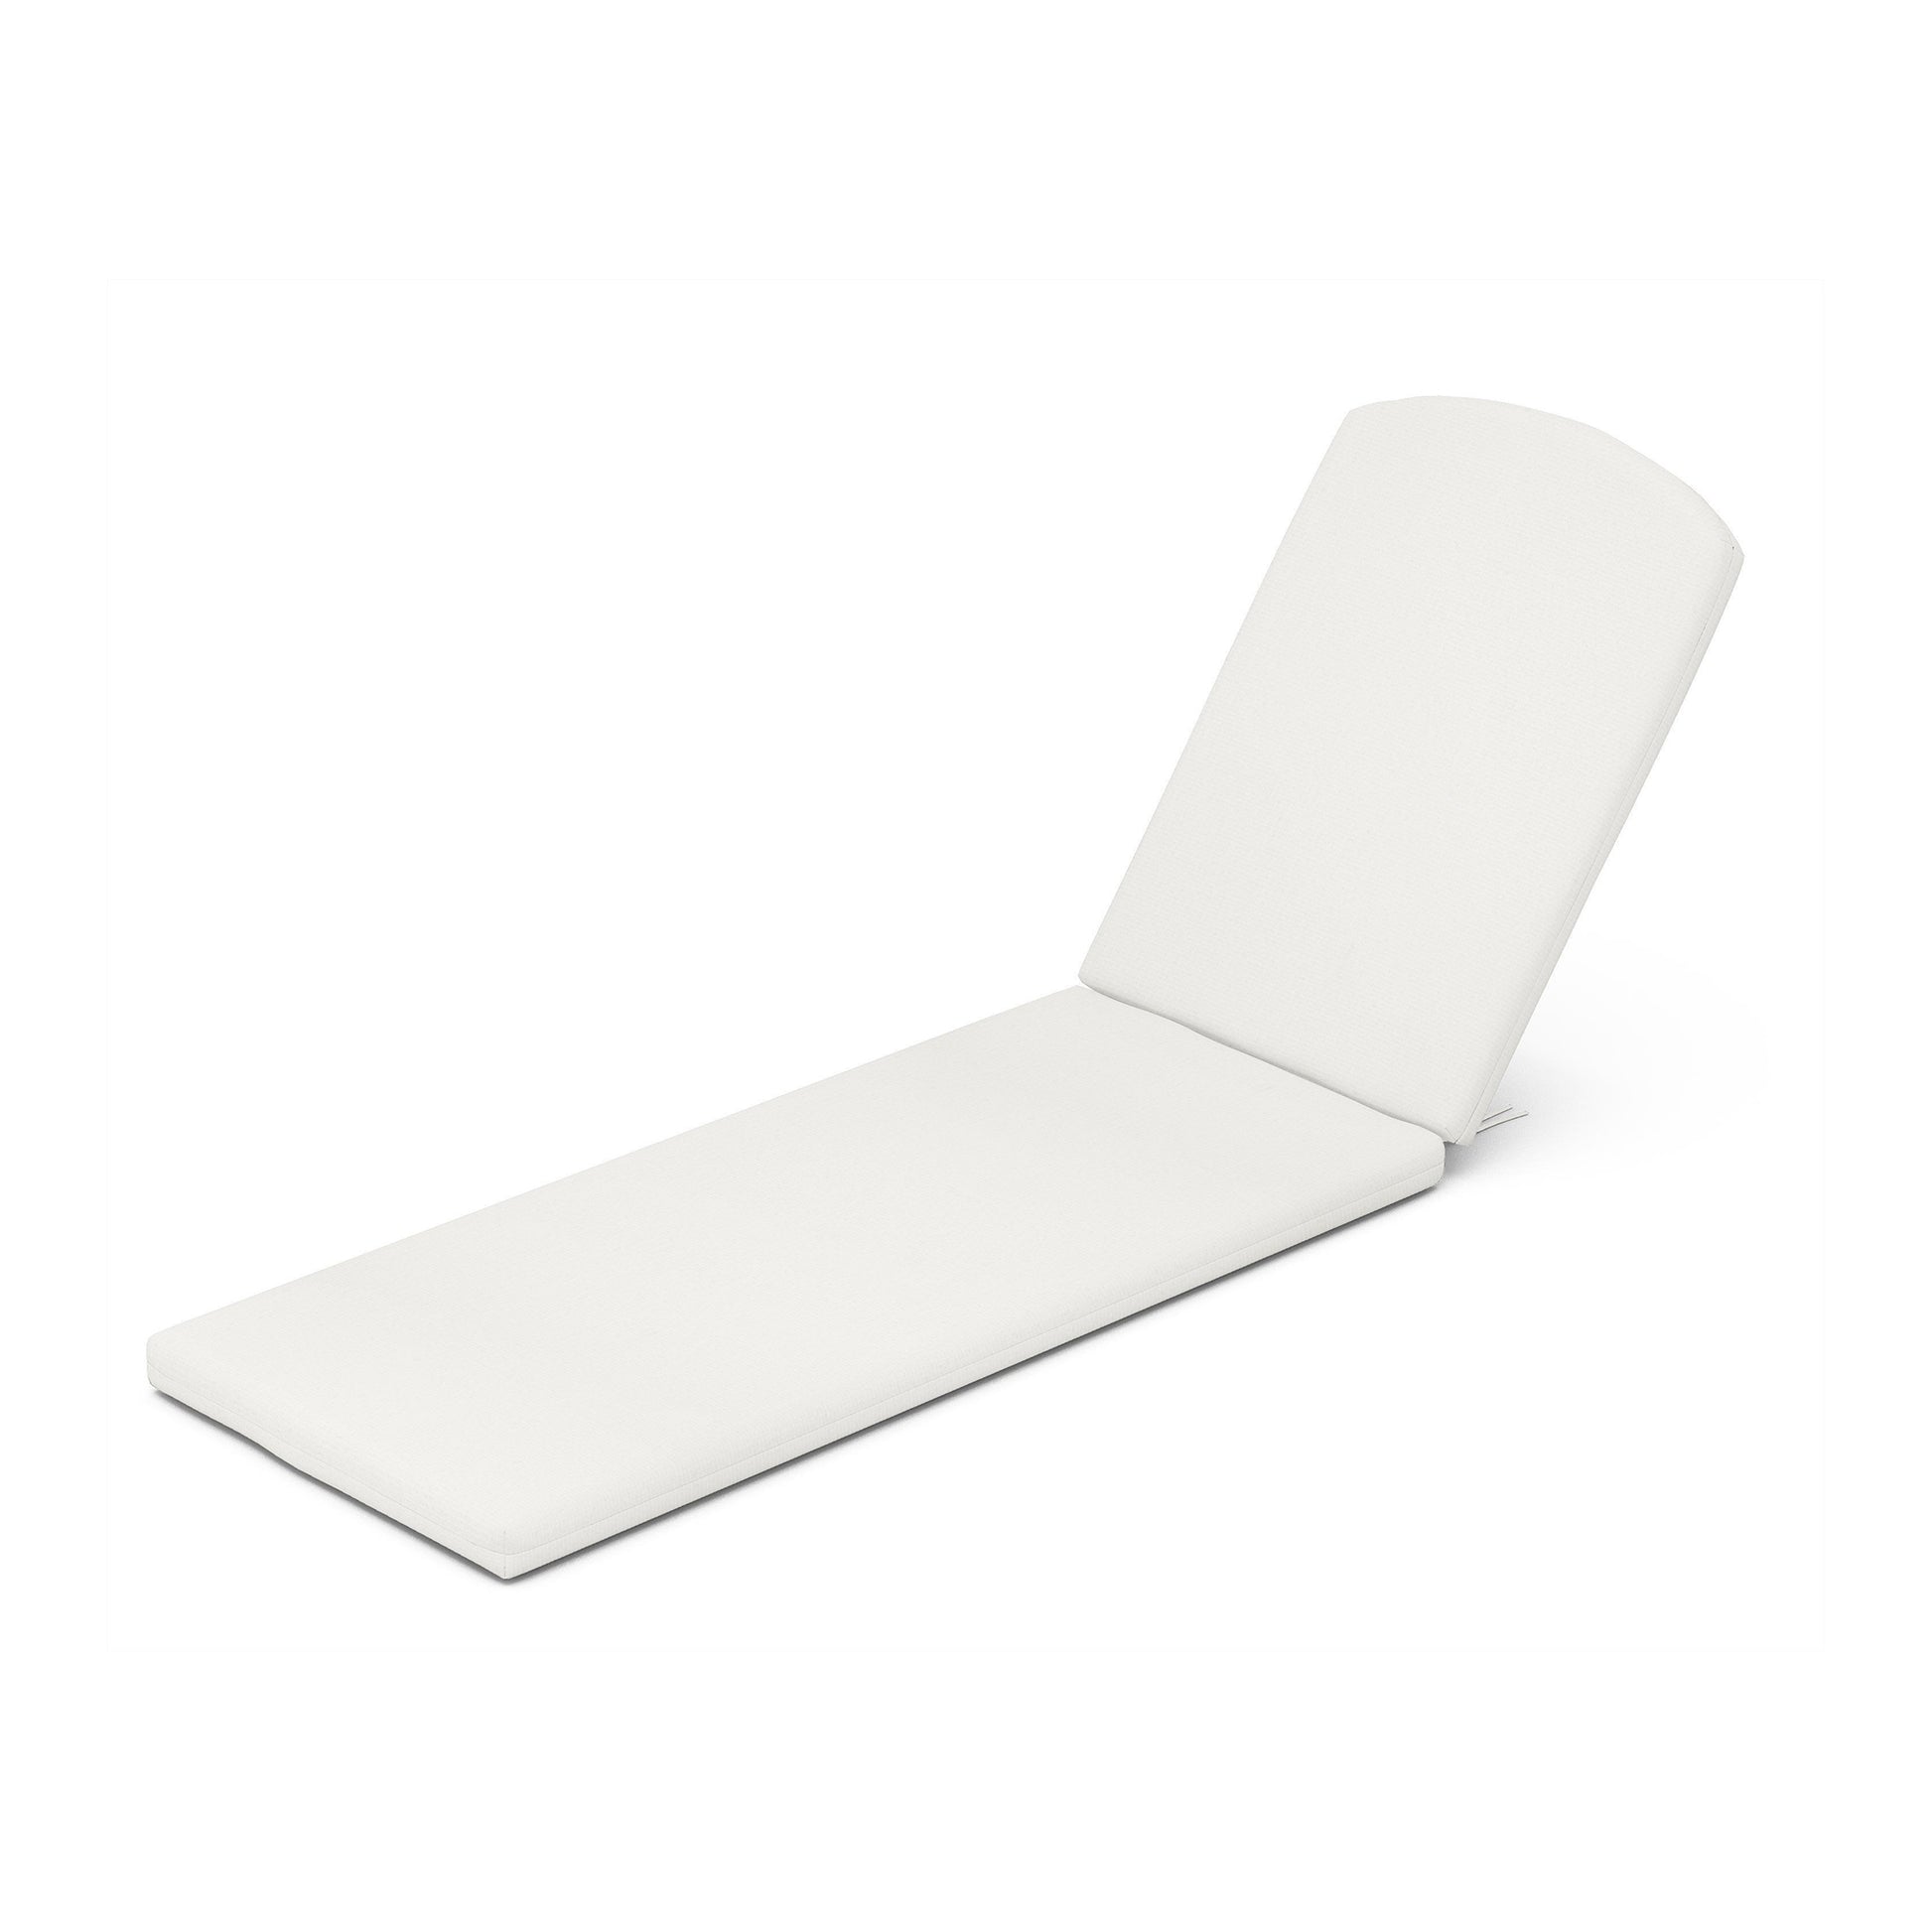 A white POLYWOOD chaise lounge with weather-resistant upholstery fabric on a white surface featuring the XPWF0004 - Full Seat Cushion.